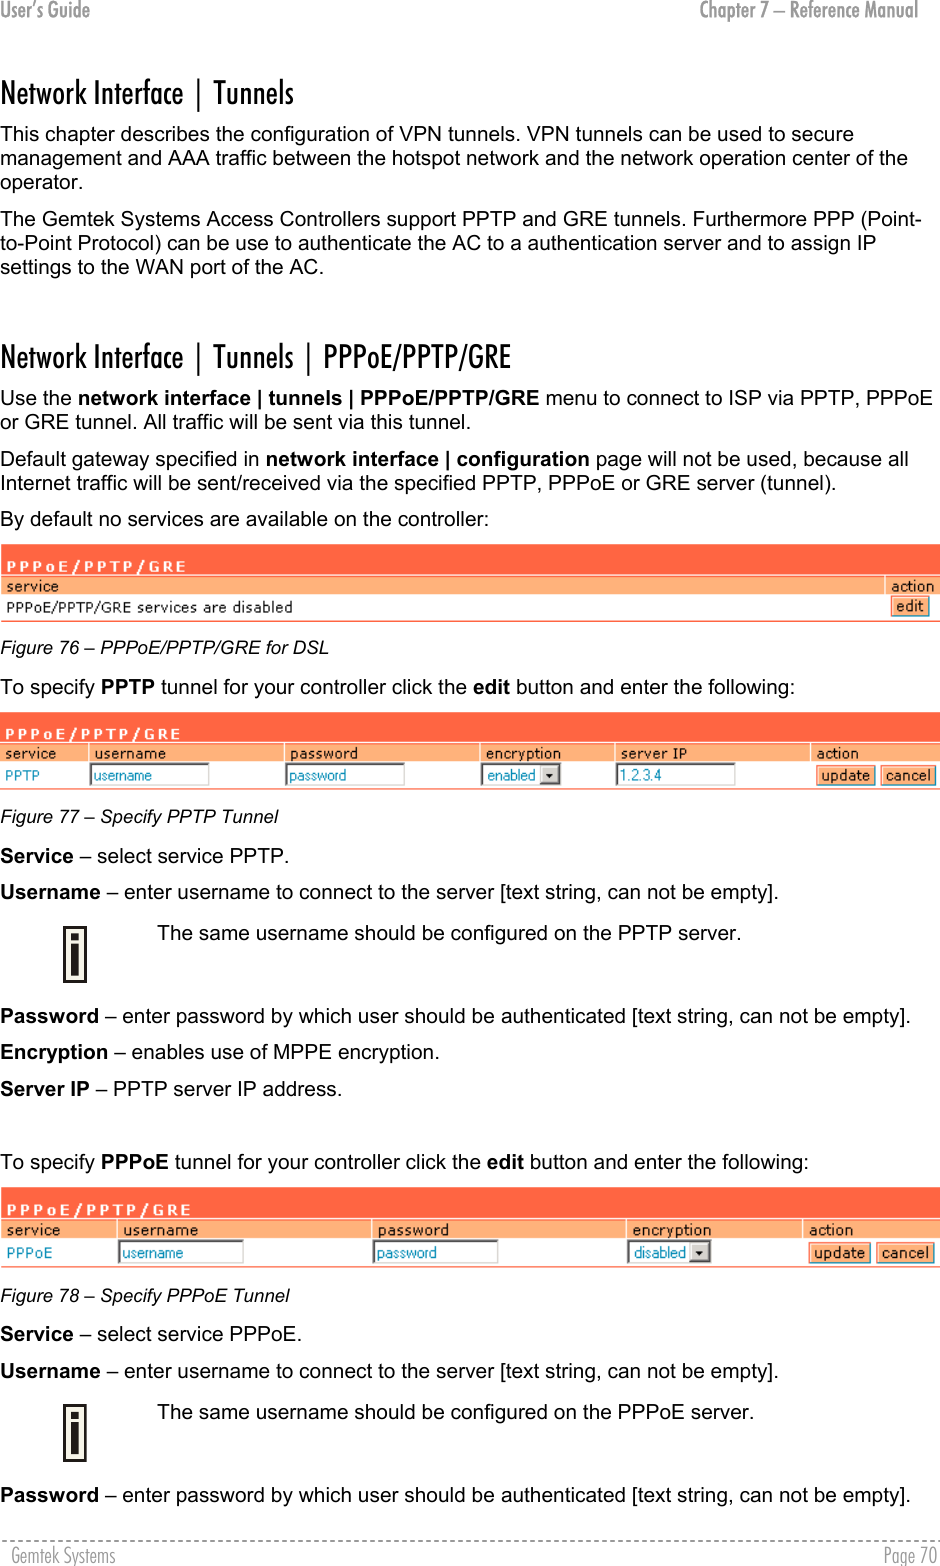 User’s Guide  Chapter 7 – Reference Manual Network Interface | Tunnels  This chapter describes the configuration of VPN tunnels. VPN tunnels can be used to secure management and AAA traffic between the hotspot network and the network operation center of the operator. The Gemtek Systems Access Controllers support PPTP and GRE tunnels. Furthermore PPP (Point-to-Point Protocol) can be use to authenticate the AC to a authentication server and to assign IP settings to the WAN port of the AC.  Network Interface | Tunnels | PPPoE/PPTP/GRE Use the network interface | tunnels | PPPoE/PPTP/GRE menu to connect to ISP via PPTP, PPPoE or GRE tunnel. All traffic will be sent via this tunnel.  Default gateway specified in network interface | configuration page will not be used, because all Internet traffic will be sent/received via the specified PPTP, PPPoE or GRE server (tunnel). By default no services are available on the controller:  Figure 76 – PPPoE/PPTP/GRE for DSL To specify PPTP tunnel for your controller click the edit button and enter the following:   Figure 77 – Specify PPTP Tunnel  Service – select service PPTP. Username – enter username to connect to the server [text string, can not be empty].  The same username should be configured on the PPTP server. Password – enter password by which user should be authenticated [text string, can not be empty]. Encryption – enables use of MPPE encryption. Server IP – PPTP server IP address.   To specify PPPoE tunnel for your controller click the edit button and enter the following:  Figure 78 – Specify PPPoE Tunnel Service – select service PPPoE. Username – enter username to connect to the server [text string, can not be empty].  The same username should be configured on the PPPoE server. Password – enter password by which user should be authenticated [text string, can not be empty]. Gemtek Systems    Page 70  